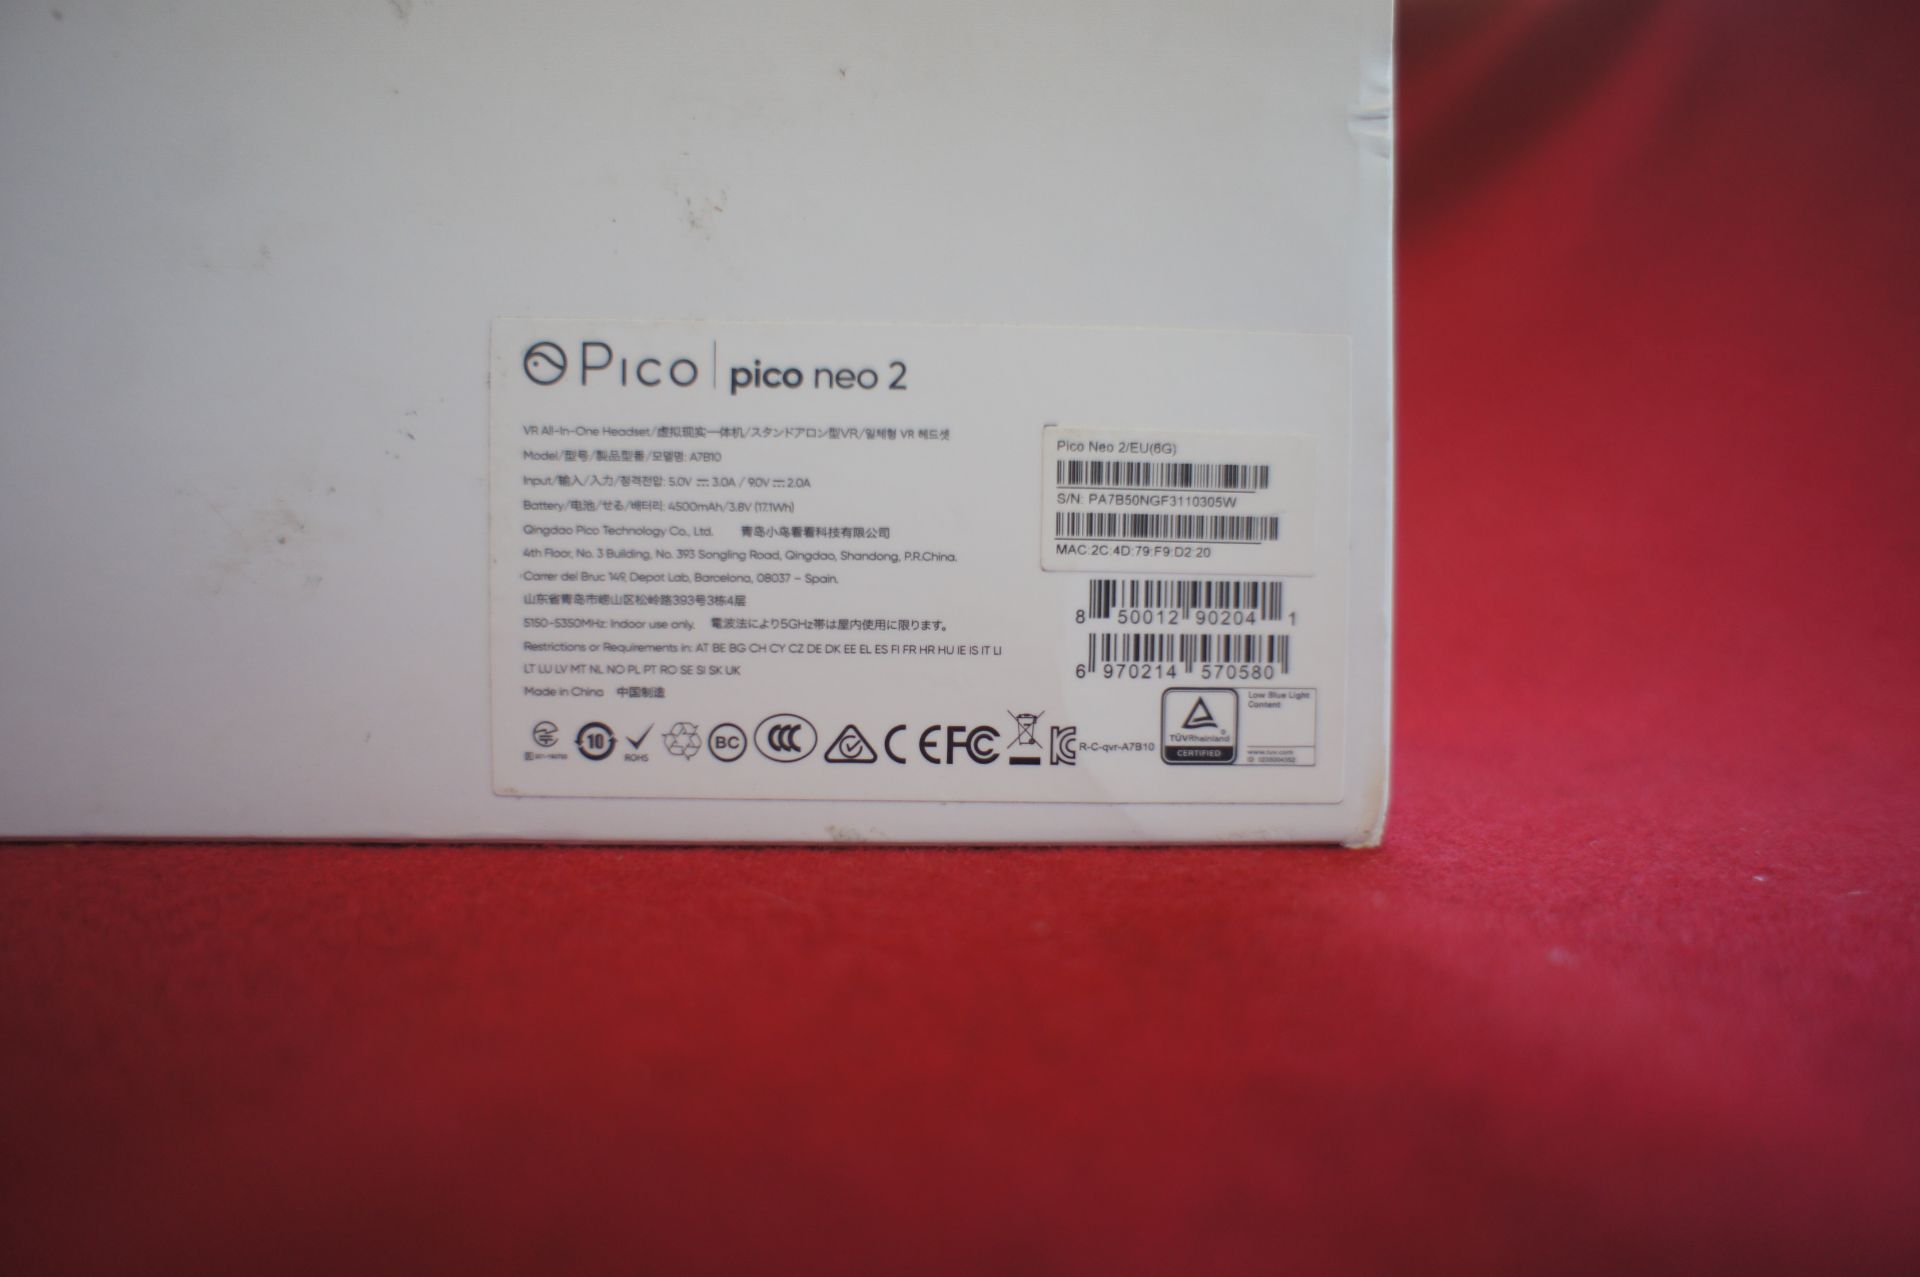 Pico Neo 2 VR headset, Asset Number C10, S/N PA7B5 - Image 2 of 3